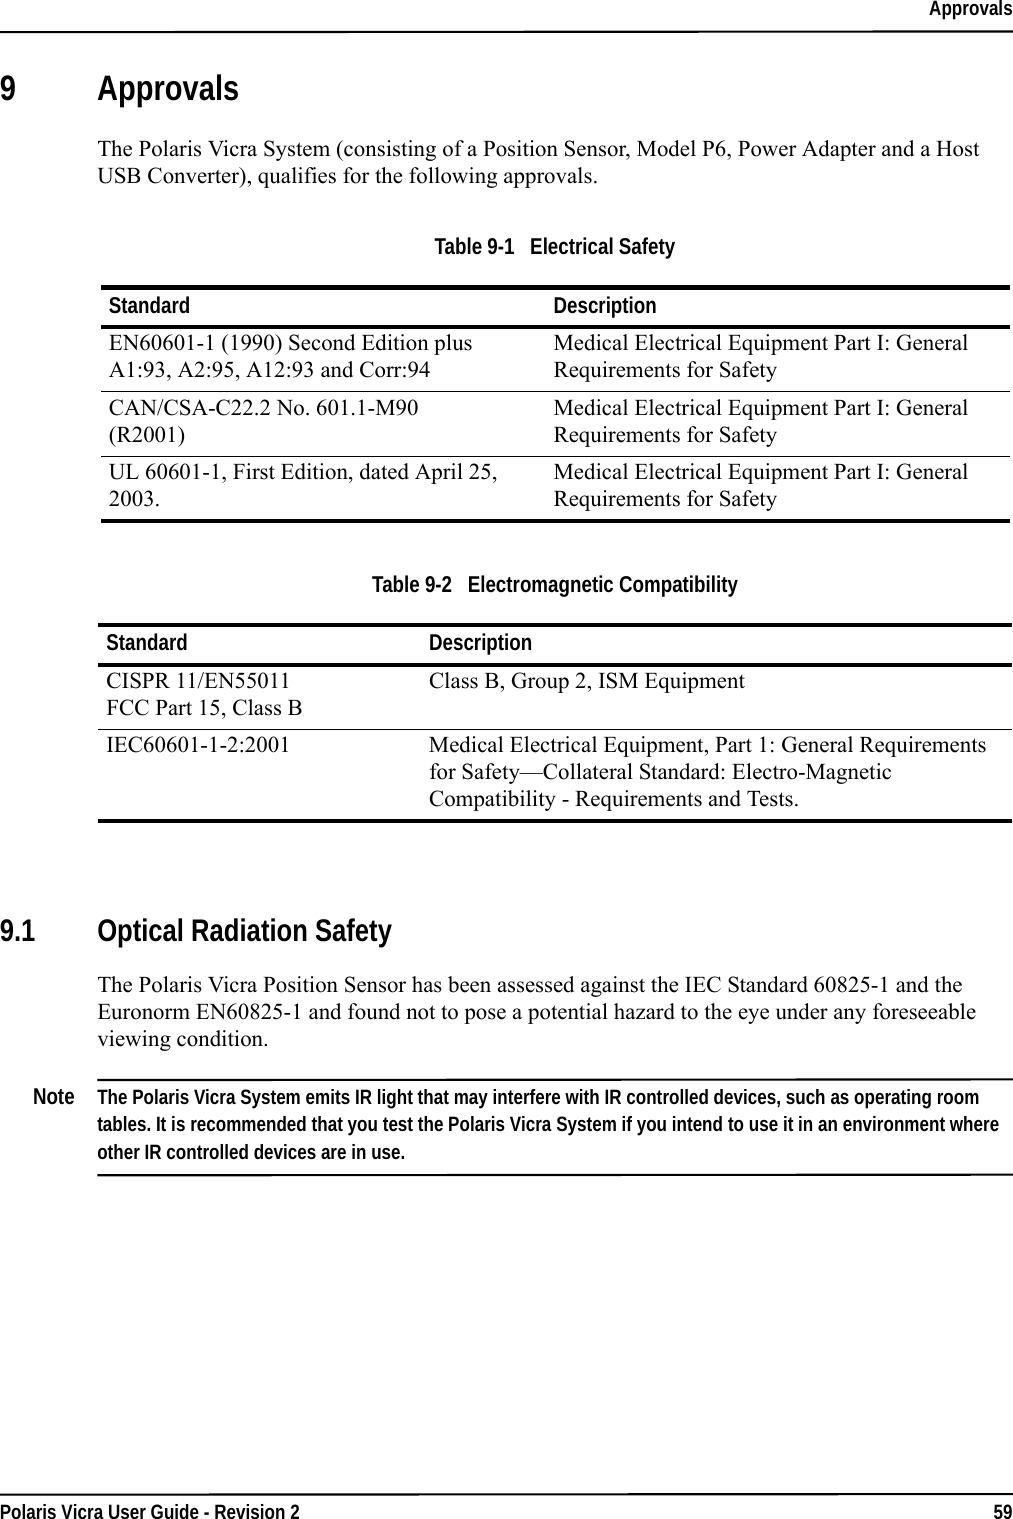 ApprovalsPolaris Vicra User Guide - Revision 2 599 ApprovalsThe Polaris Vicra System (consisting of a Position Sensor, Model P6, Power Adapter and a Host USB Converter), qualifies for the following approvals.9.1 Optical Radiation SafetyThe Polaris Vicra Position Sensor has been assessed against the IEC Standard 60825-1 and the Euronorm EN60825-1 and found not to pose a potential hazard to the eye under any foreseeable viewing condition.Note The Polaris Vicra System emits IR light that may interfere with IR controlled devices, such as operating room tables. It is recommended that you test the Polaris Vicra System if you intend to use it in an environment where other IR controlled devices are in use. Table 9-1   Electrical SafetyStandard DescriptionEN60601-1 (1990) Second Edition plus A1:93, A2:95, A12:93 and Corr:94Medical Electrical Equipment Part I: General Requirements for SafetyCAN/CSA-C22.2 No. 601.1-M90(R2001)Medical Electrical Equipment Part I: General Requirements for SafetyUL 60601-1, First Edition, dated April 25, 2003.Medical Electrical Equipment Part I: General Requirements for SafetyTable 9-2   Electromagnetic CompatibilityStandard DescriptionCISPR 11/EN55011FCC Part 15, Class BClass B, Group 2, ISM EquipmentIEC60601-1-2:2001 Medical Electrical Equipment, Part 1: General Requirements for Safety—Collateral Standard: Electro-Magnetic Compatibility - Requirements and Tests.